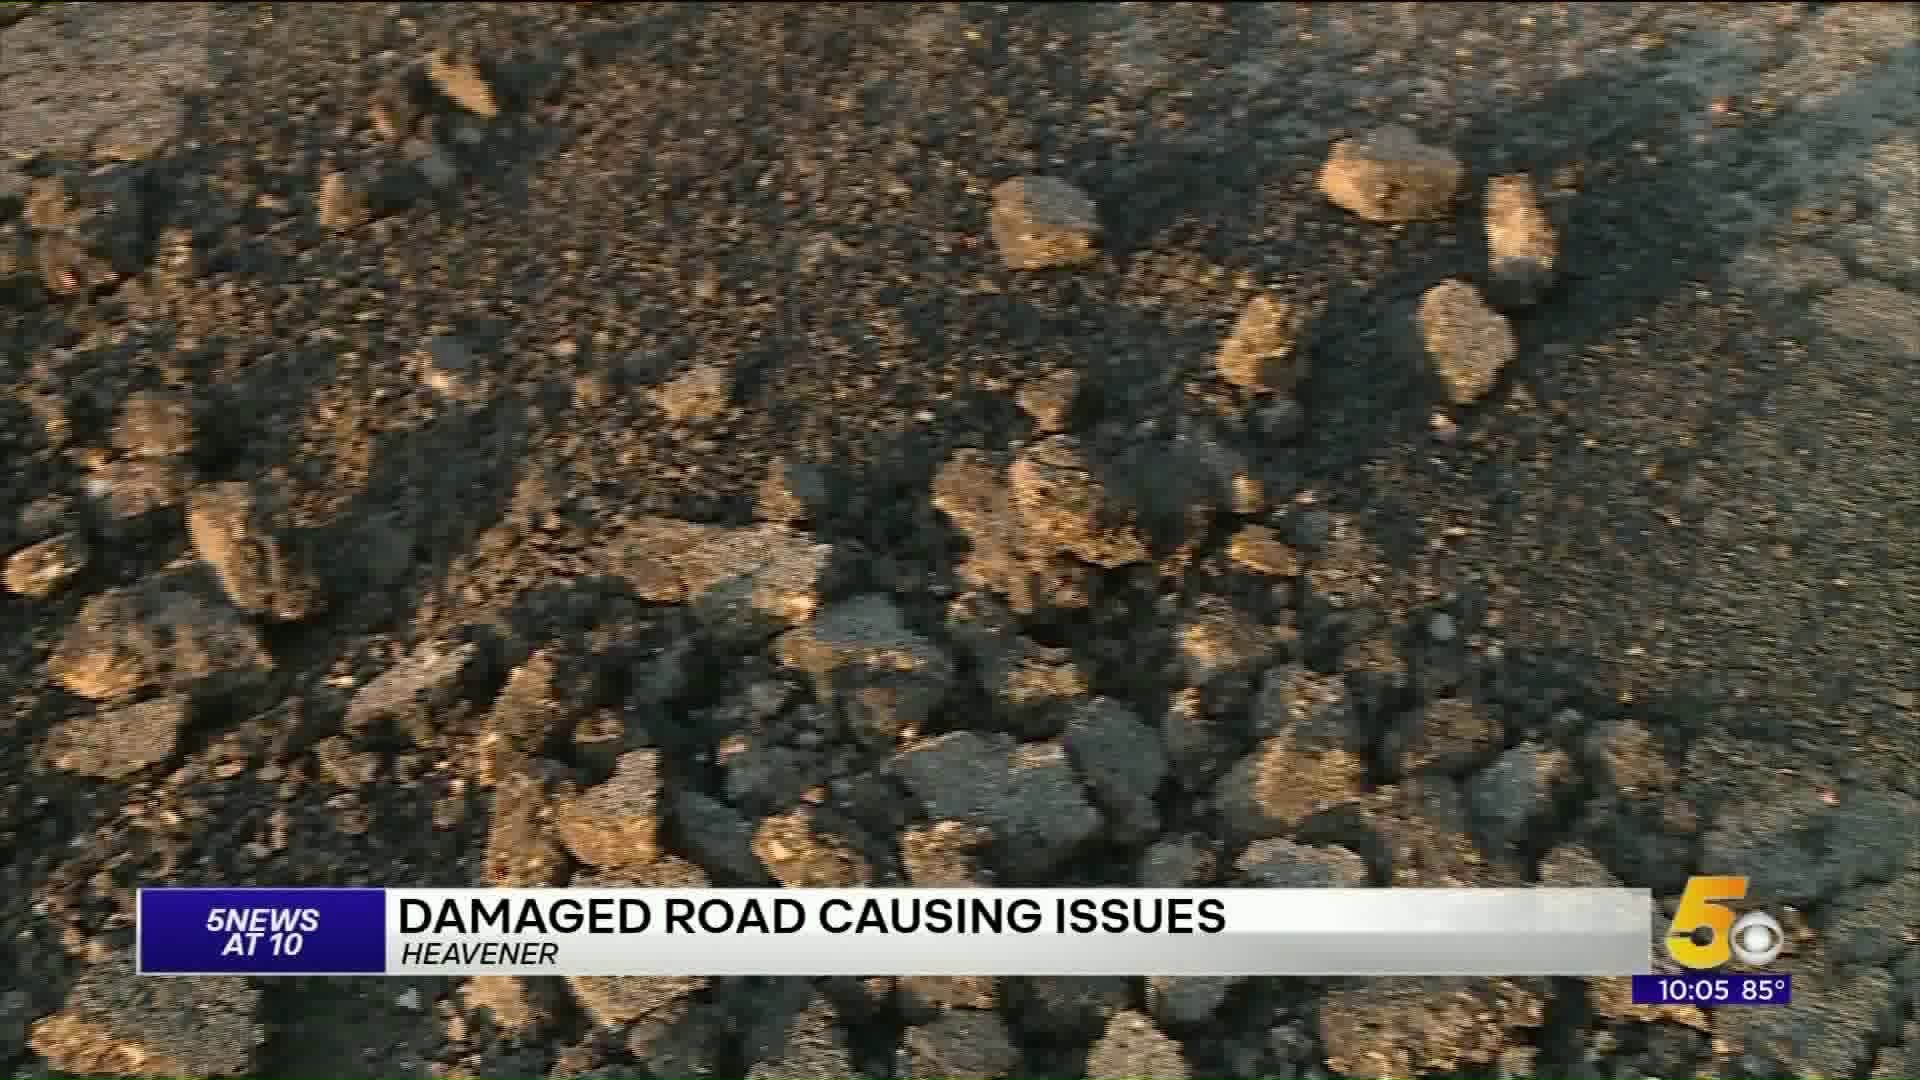 Damaged Road Issues